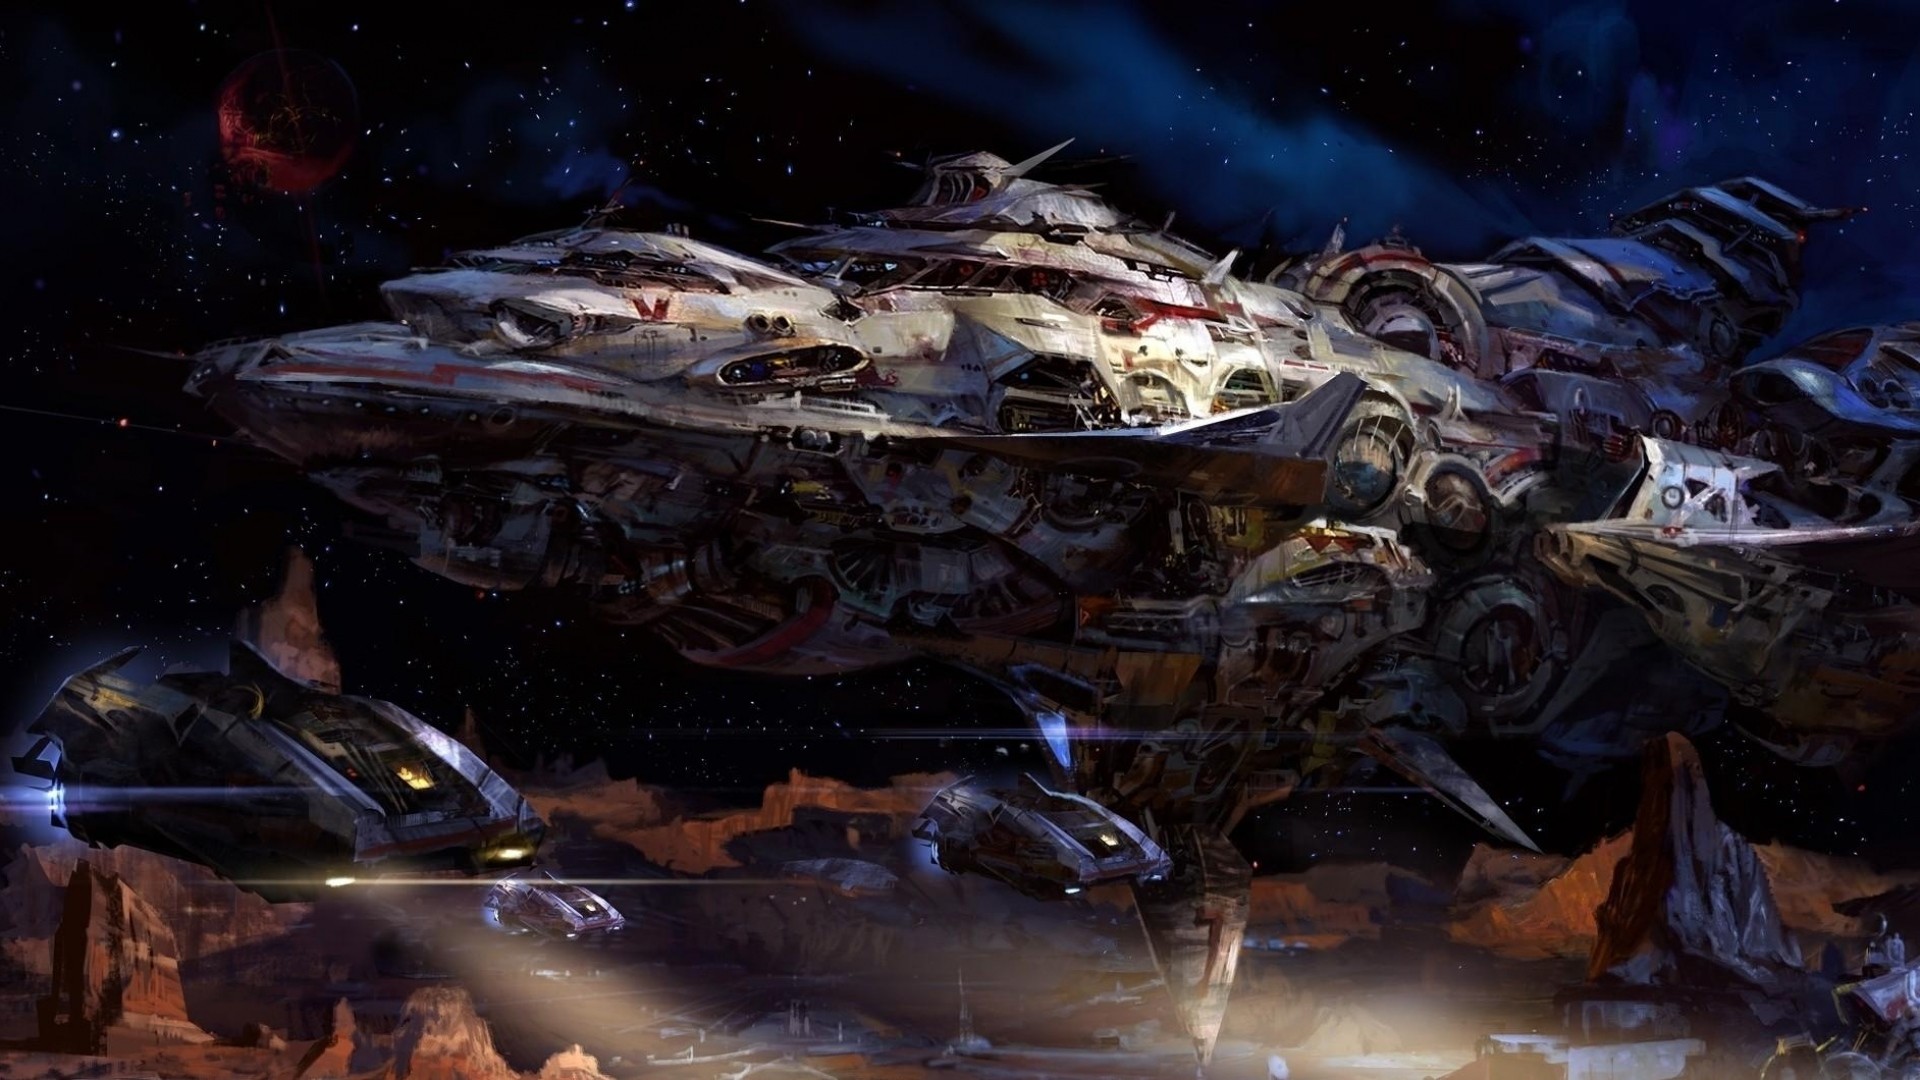 1920x1080 Spaceship Wallpapers Picture For Free Wallpaper